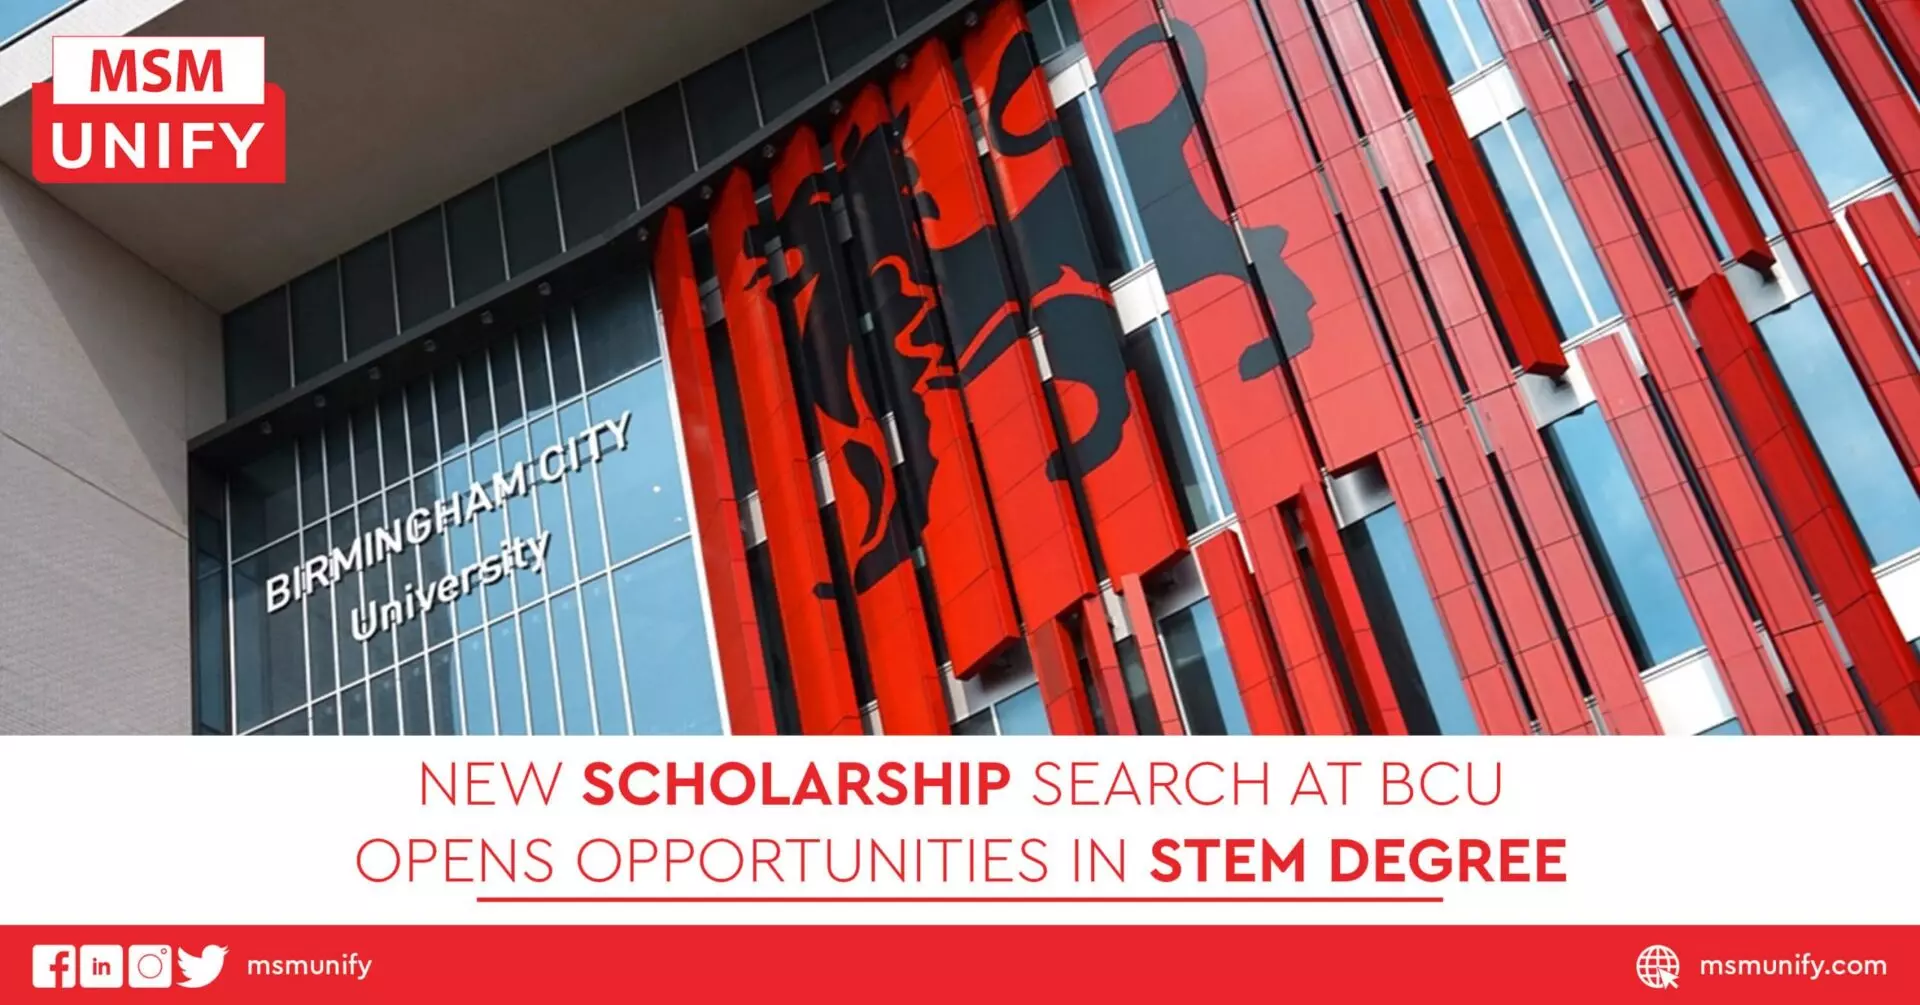 New Scholarship Search at BCU Opens Opportunities in STEM Degree scaled 1